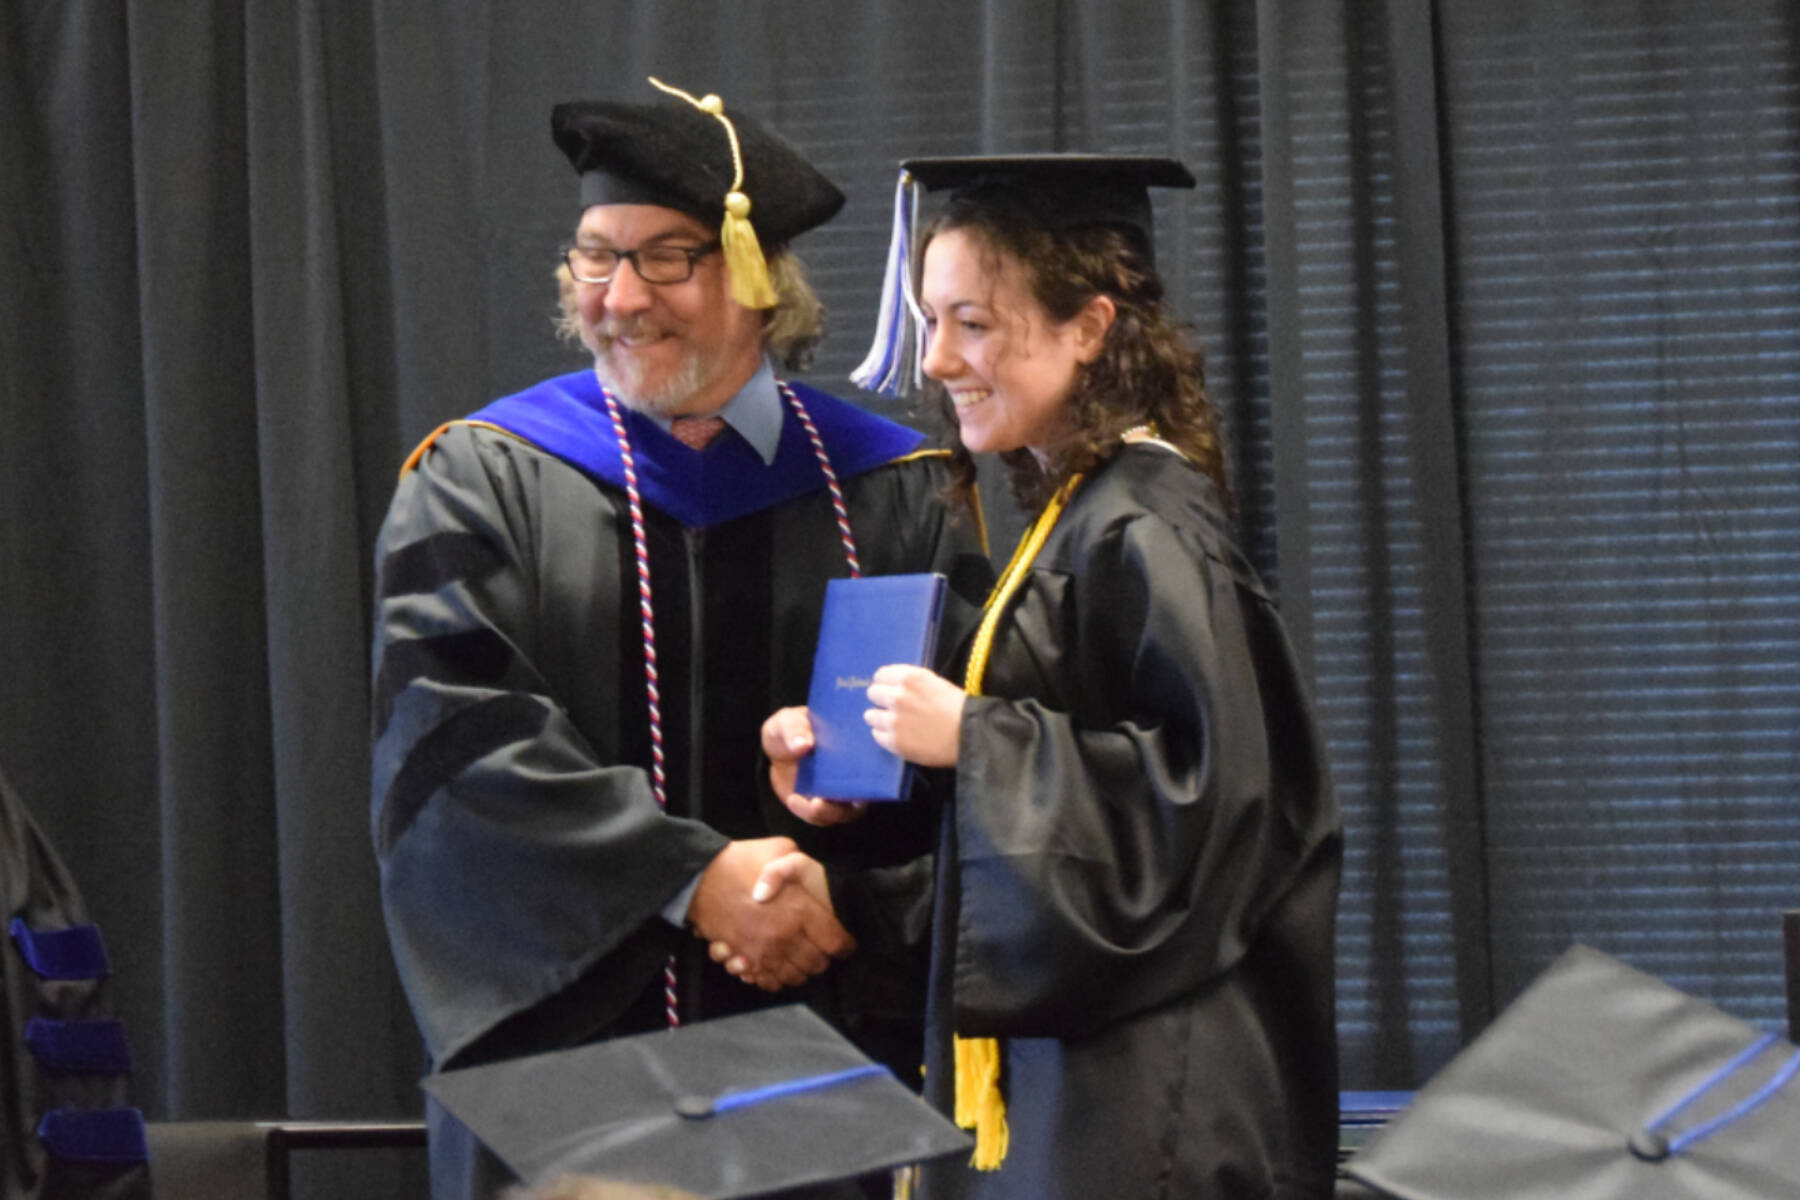 Kachemak Bay Campus Director Dr. Reid Brewer (left) presents valedictorian Elizabeth Rozeboom (right) with her Associate of Arts diploma during the 2023 KBC Commencement on Wednesday, May 10, 2023 in Homer, Alaska.